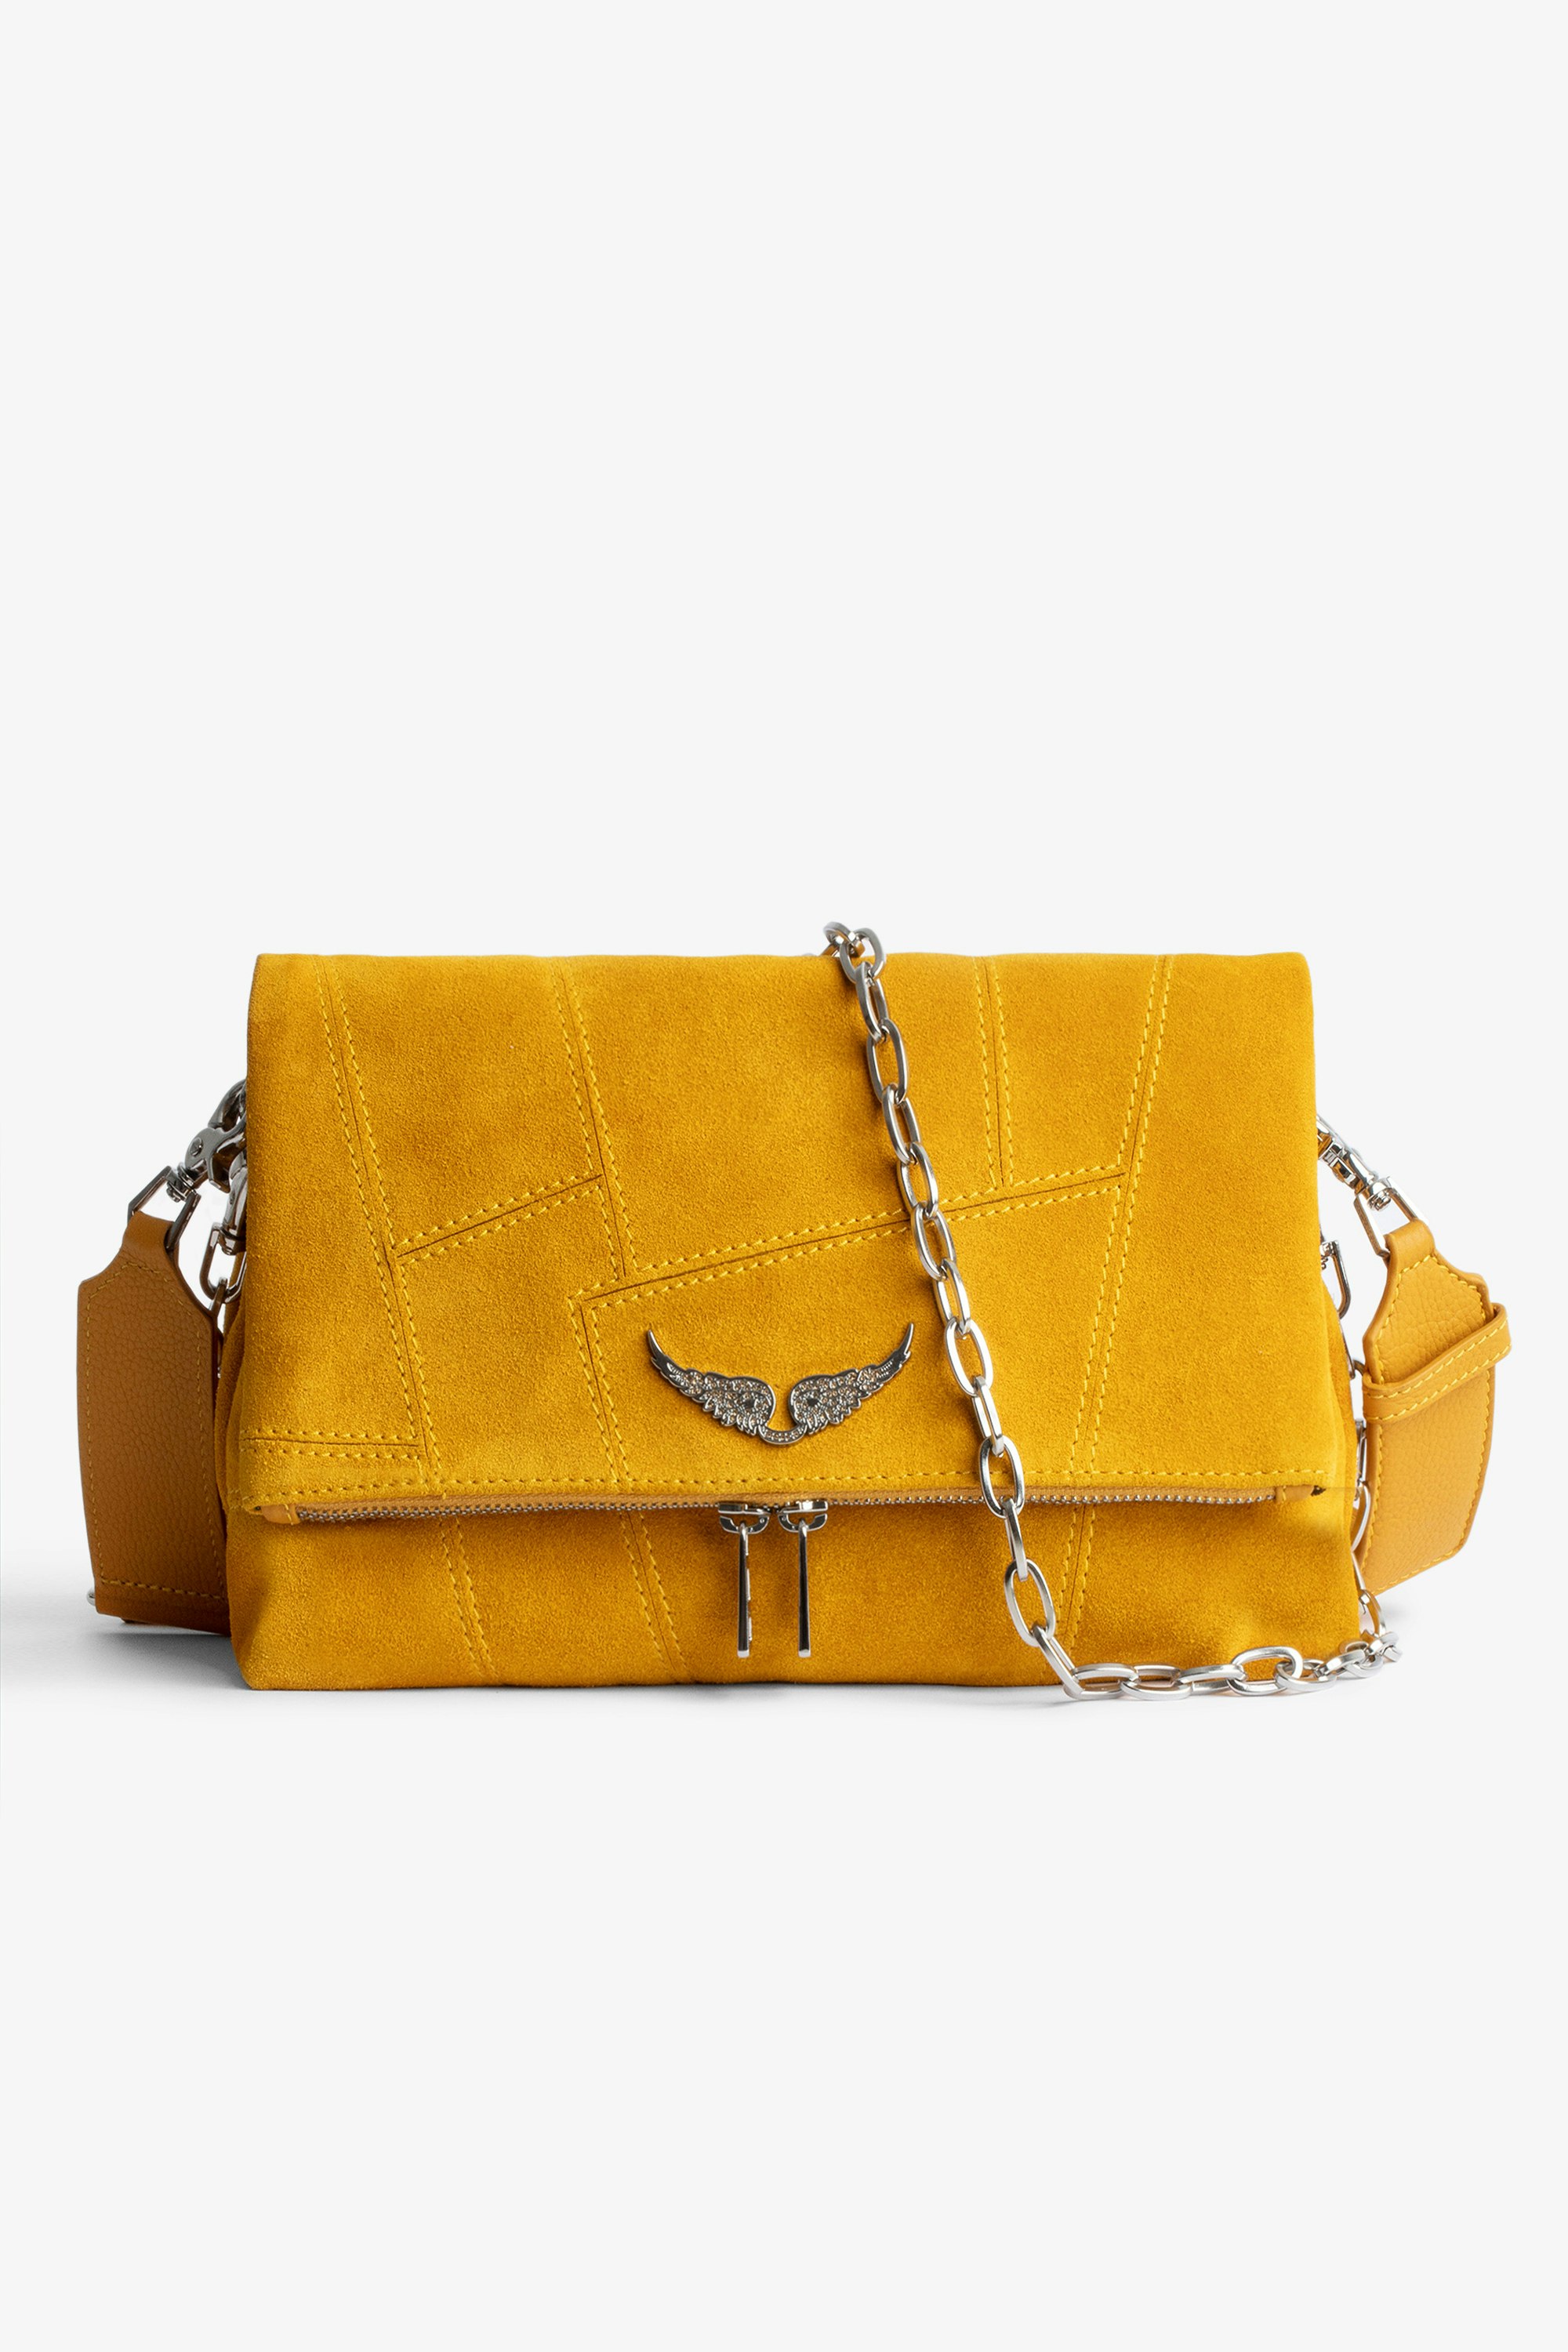 Rocky Suede バッグ Bag in yellow patchwork suede with shoulder strap